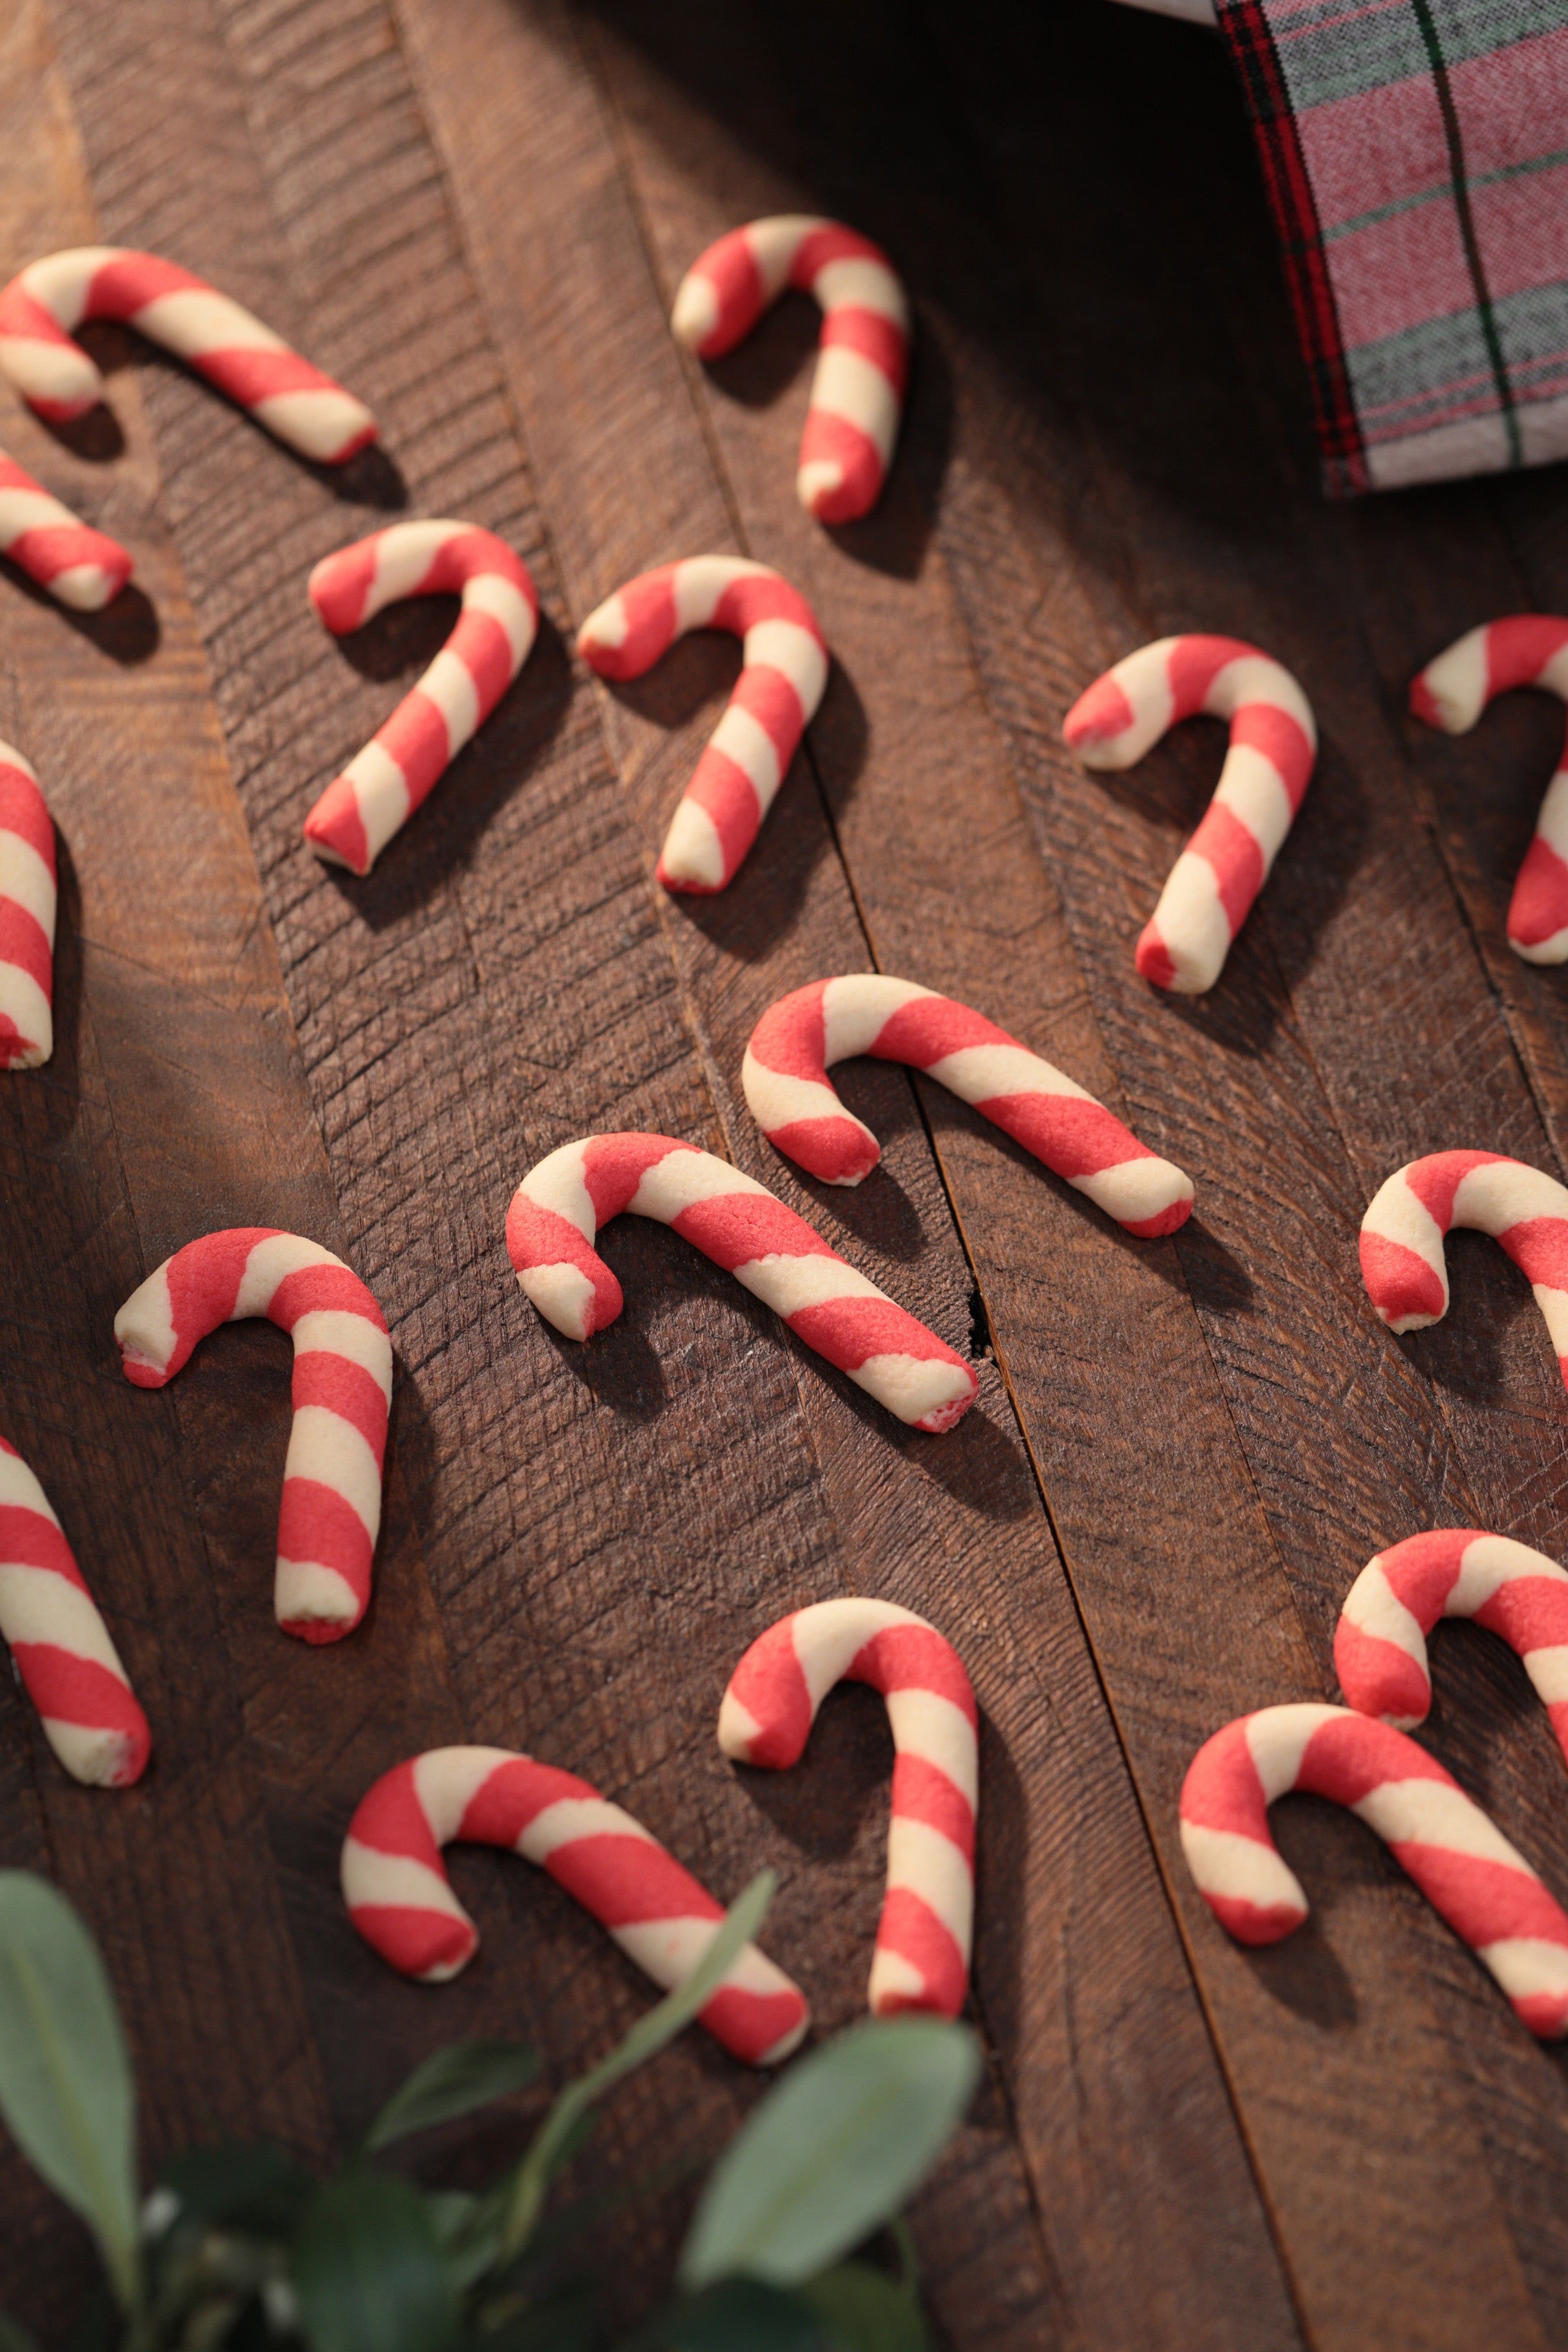 A rustic wooden table with a diagonal arrangement of red and white striped candy canes. - Candy cane